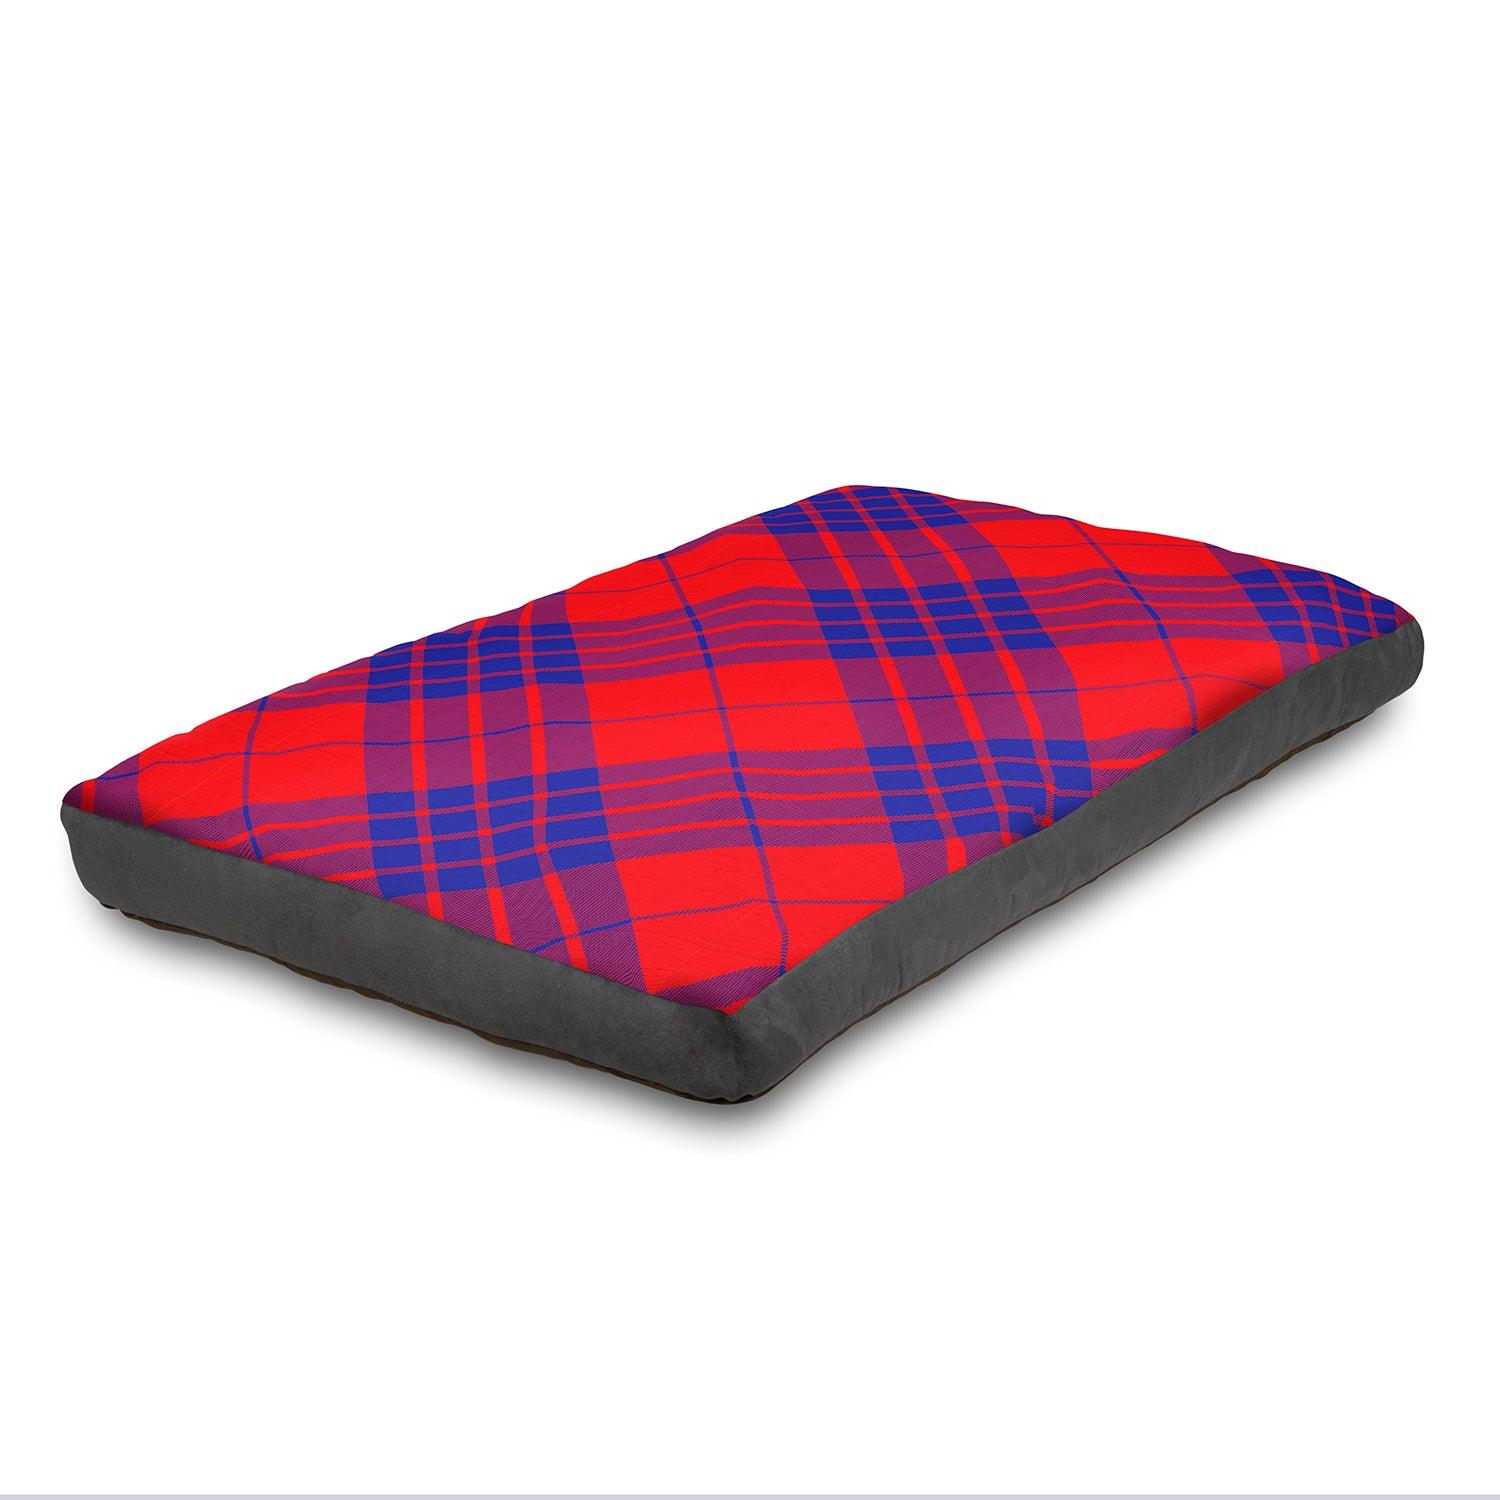 View Super Comfy Dog Bed Soft and Fluffy with Washable Cover XLarge 150 cm x 100 cm Red information